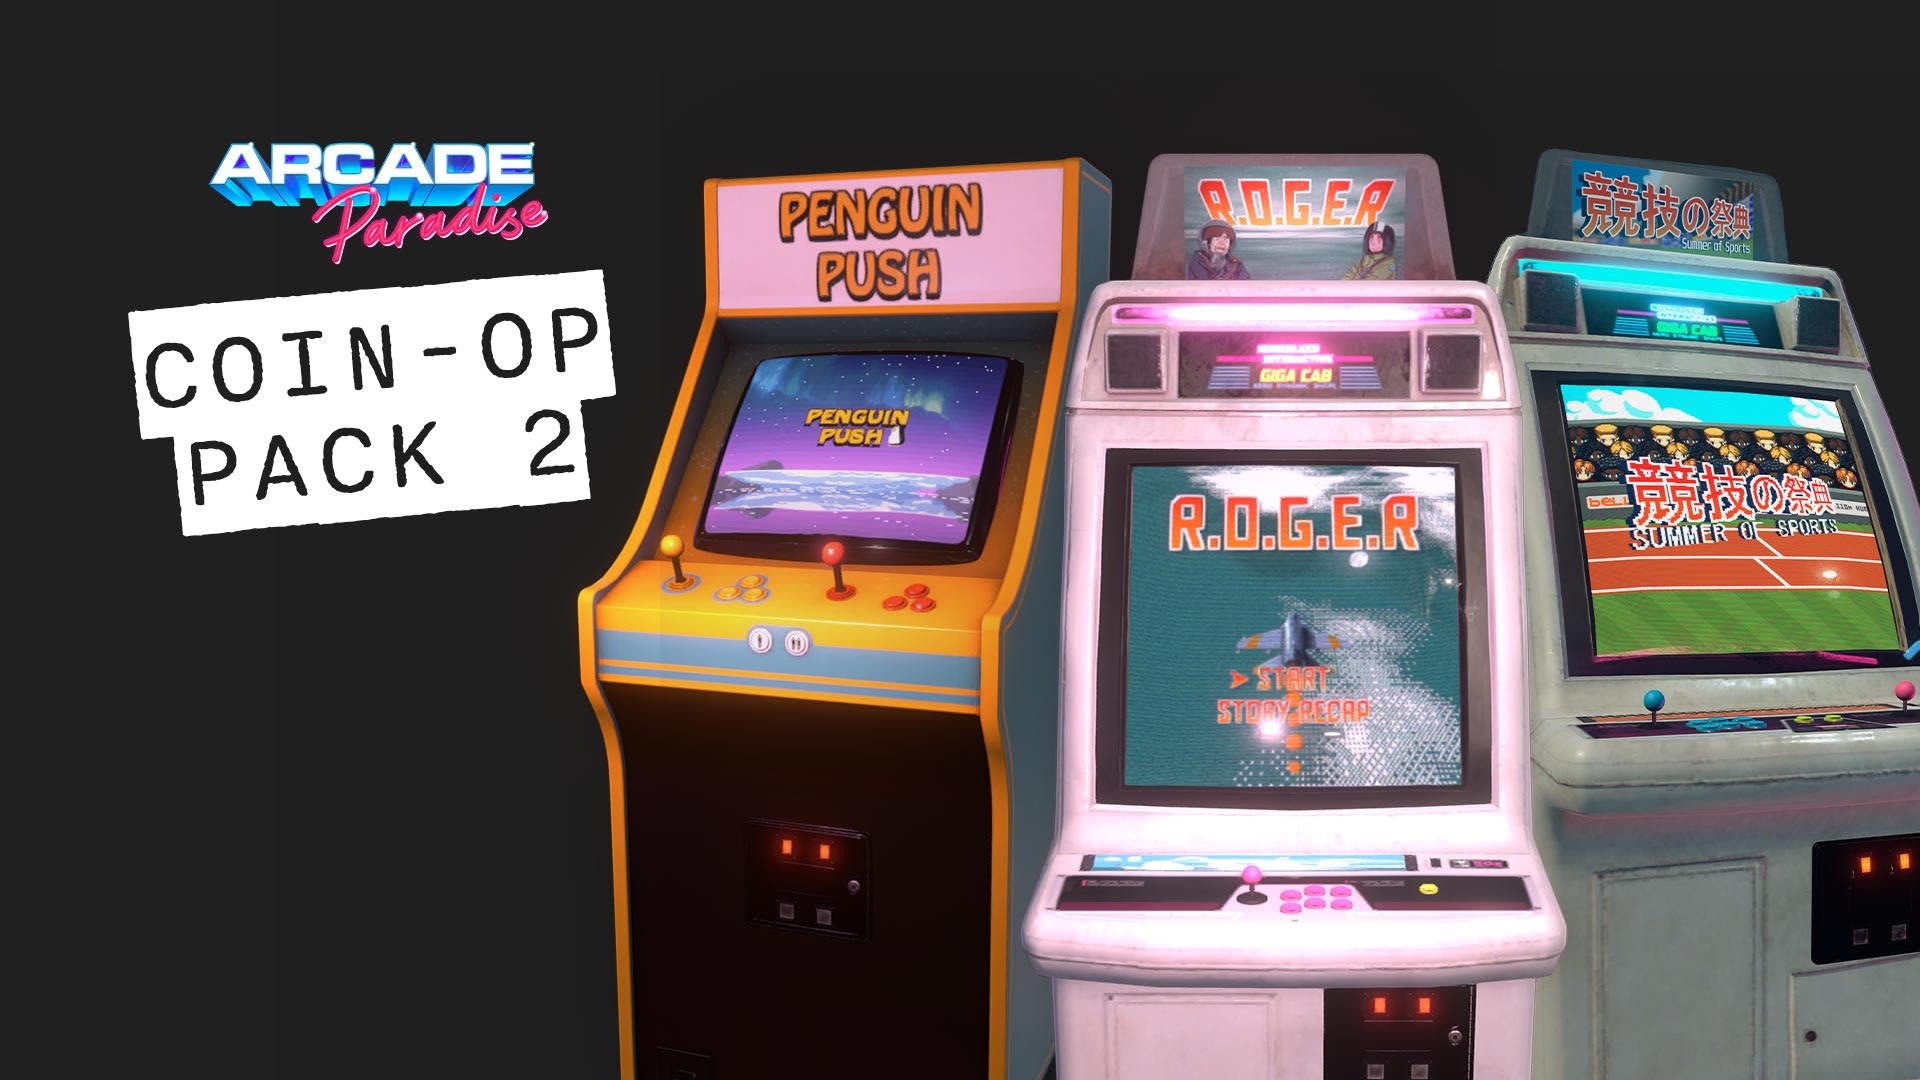 Arcade Paradise Coin-Op Pack 2